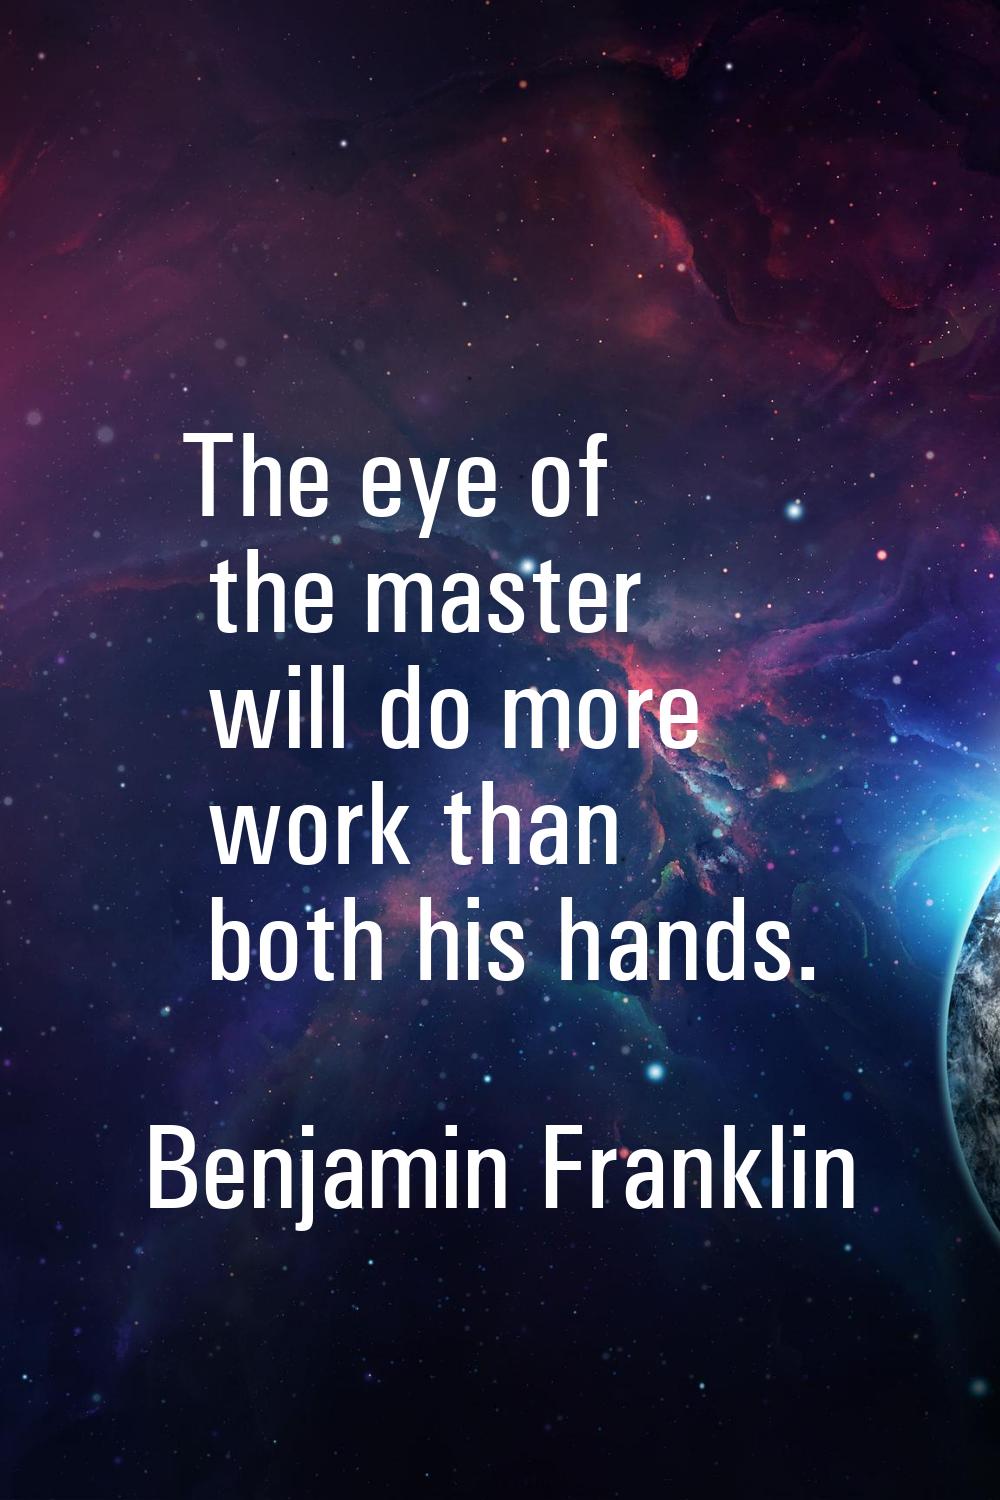 The eye of the master will do more work than both his hands.